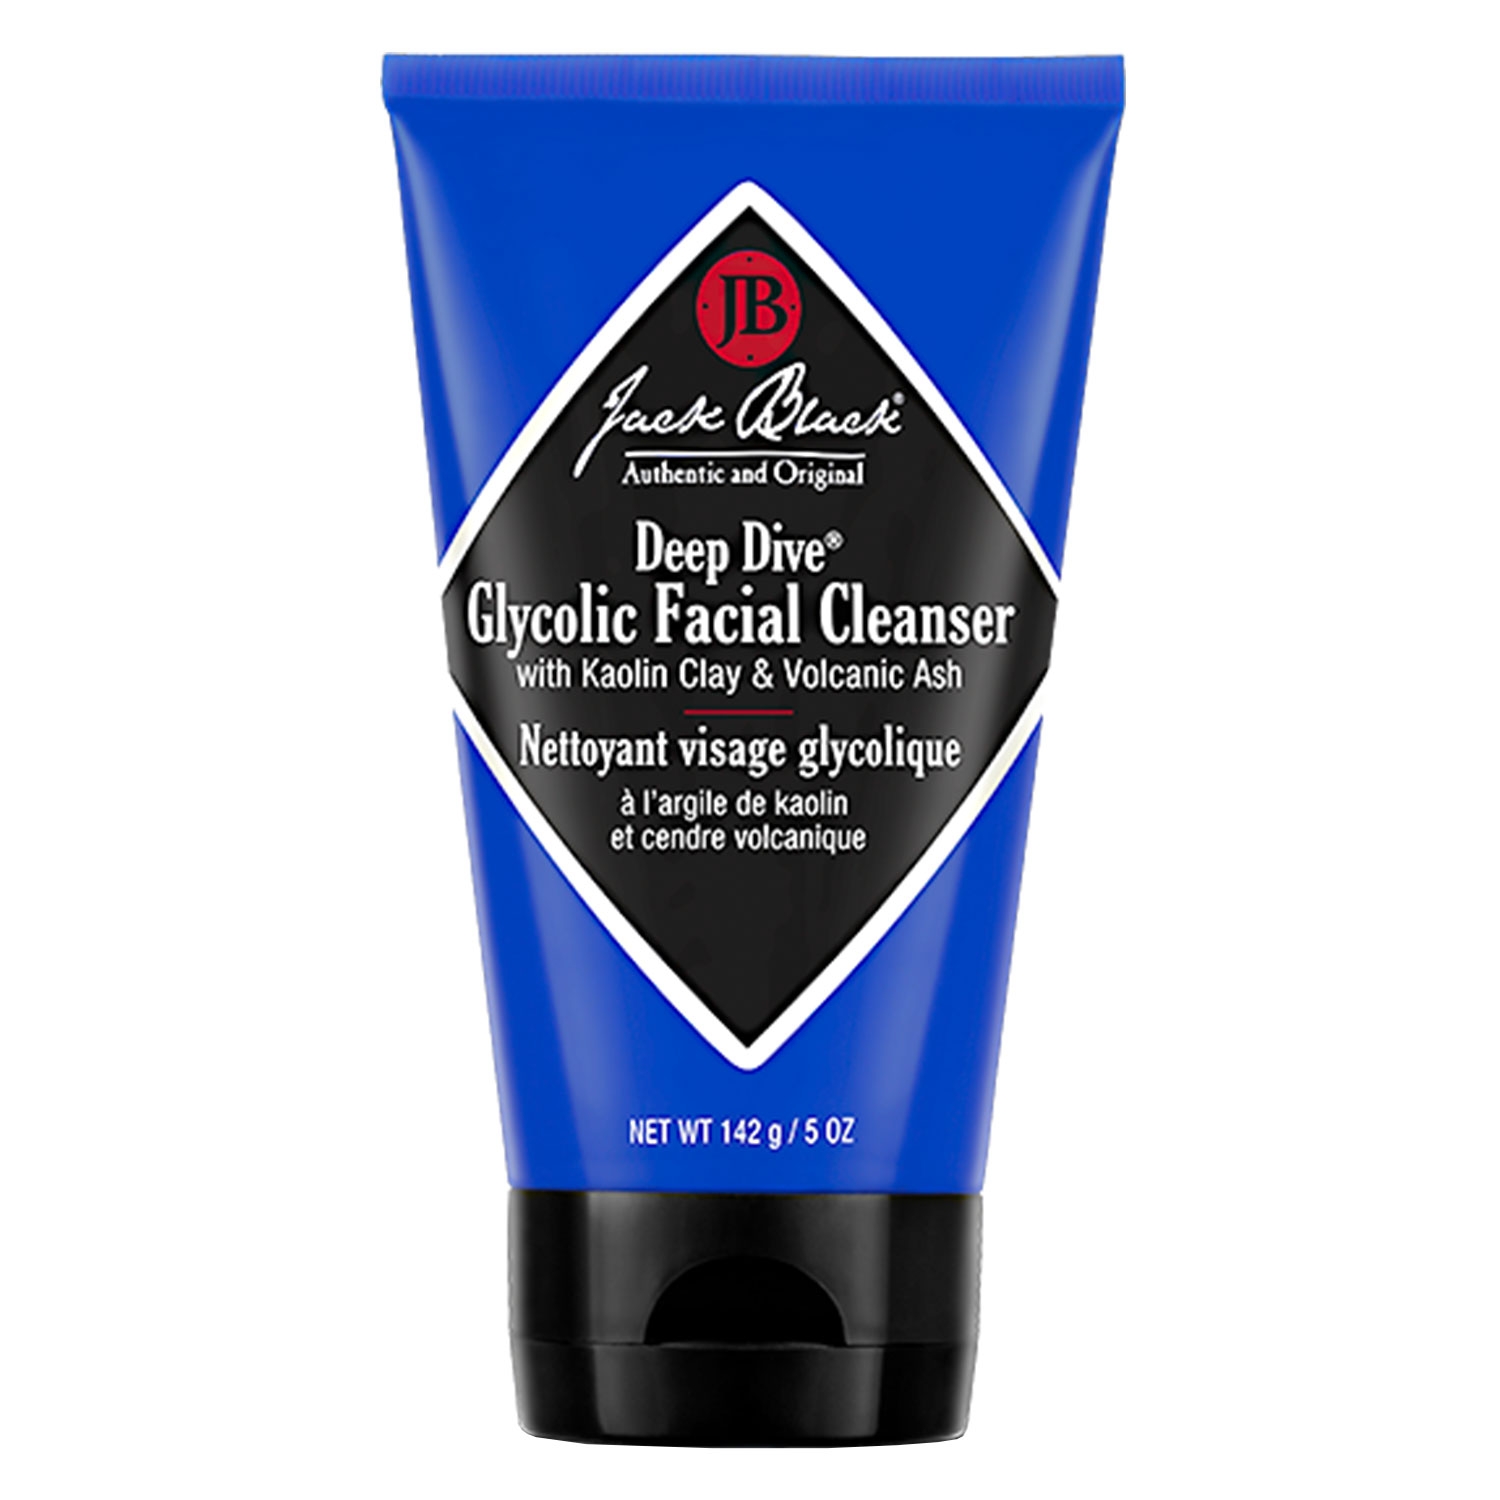 Product image from Jack Black - Deep Dive Glycolic Facial Cleanser